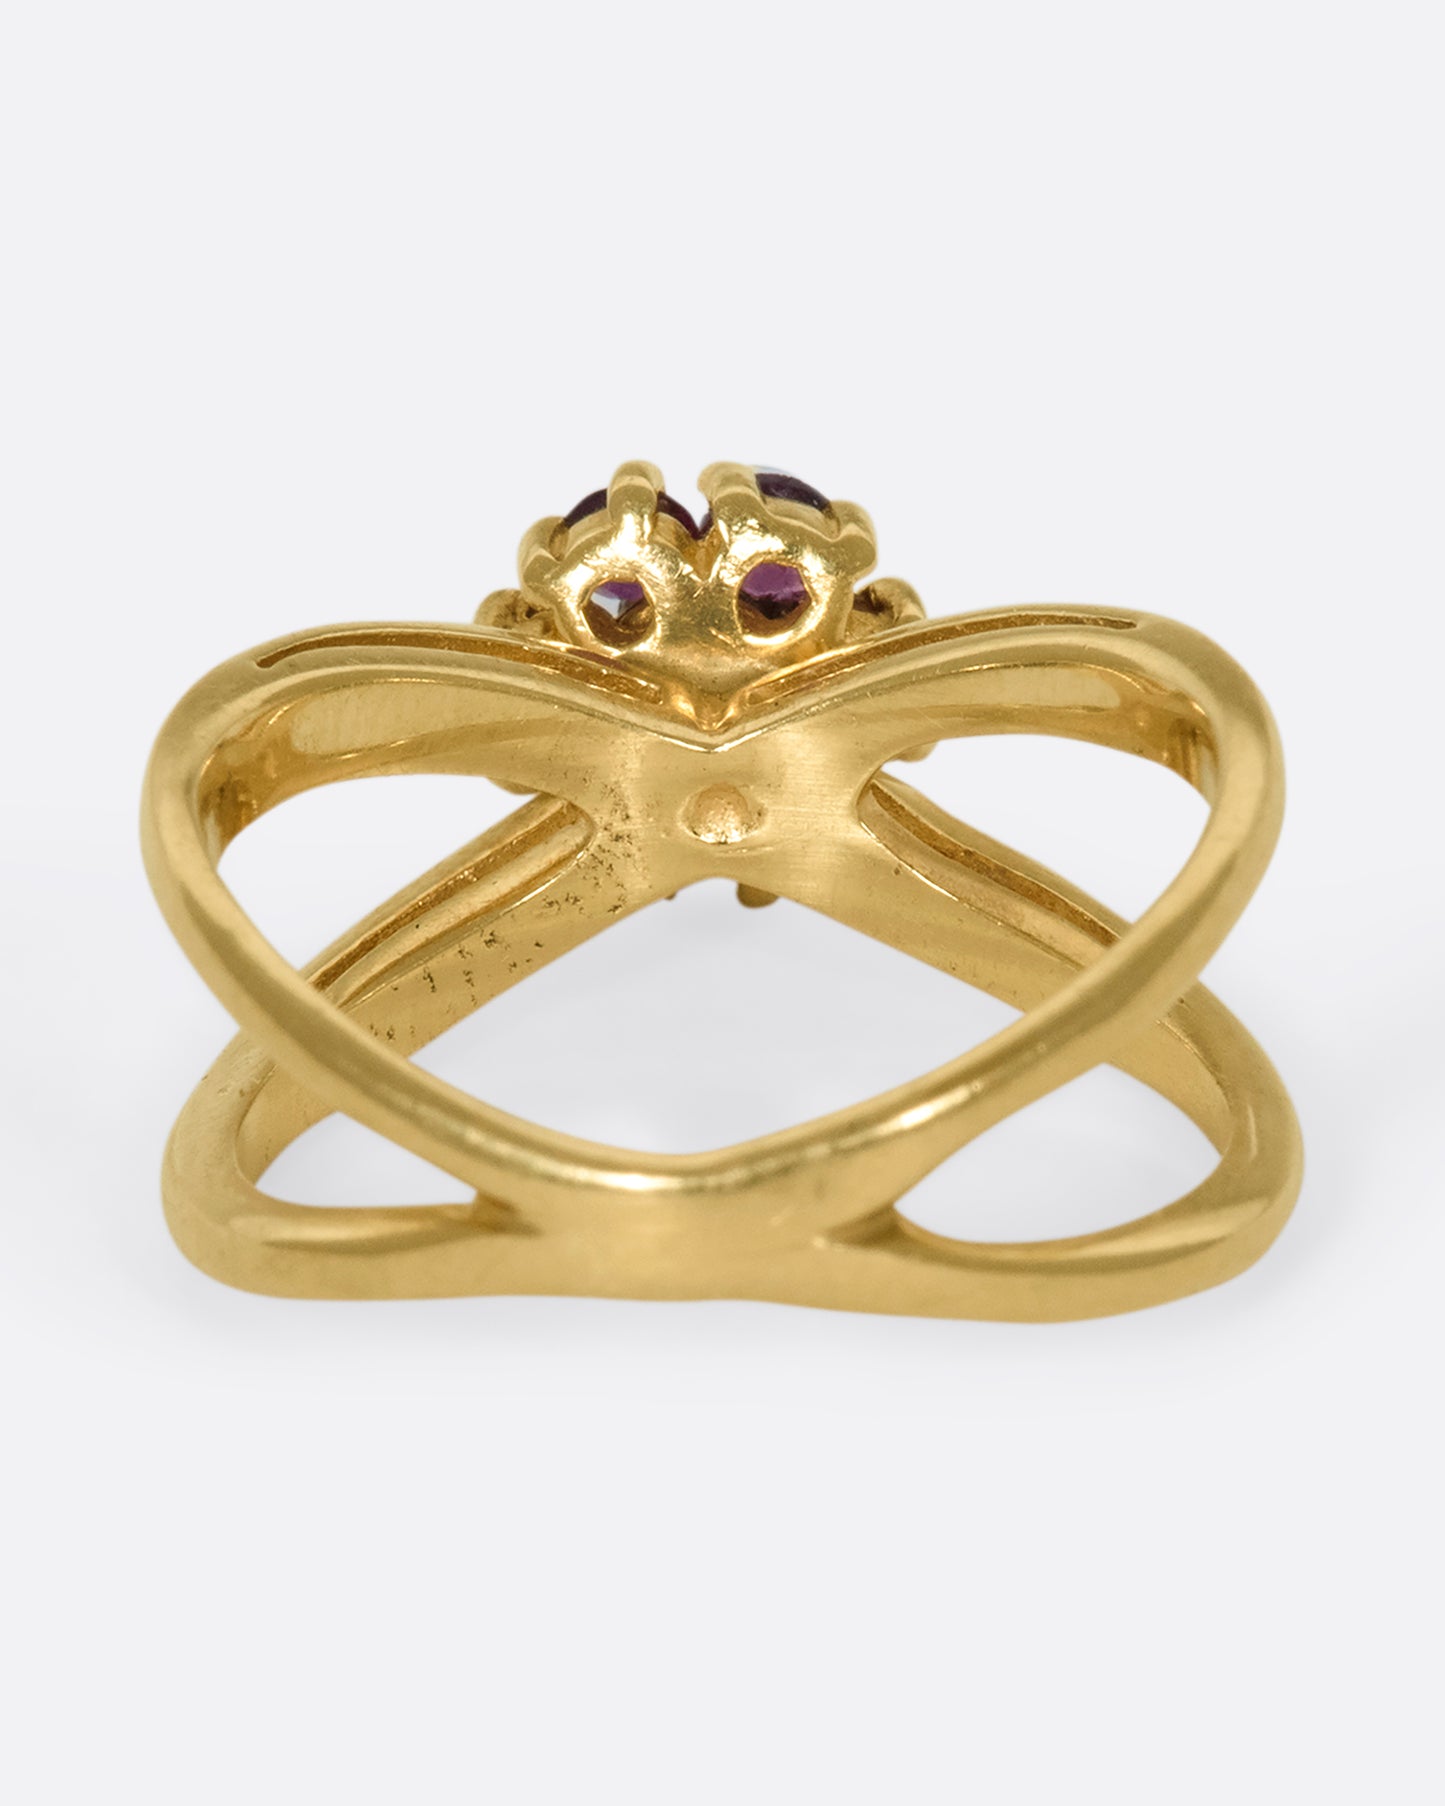 A view of the underside of a yellow gold double banded ring with a ruby and diamond flower in the center.